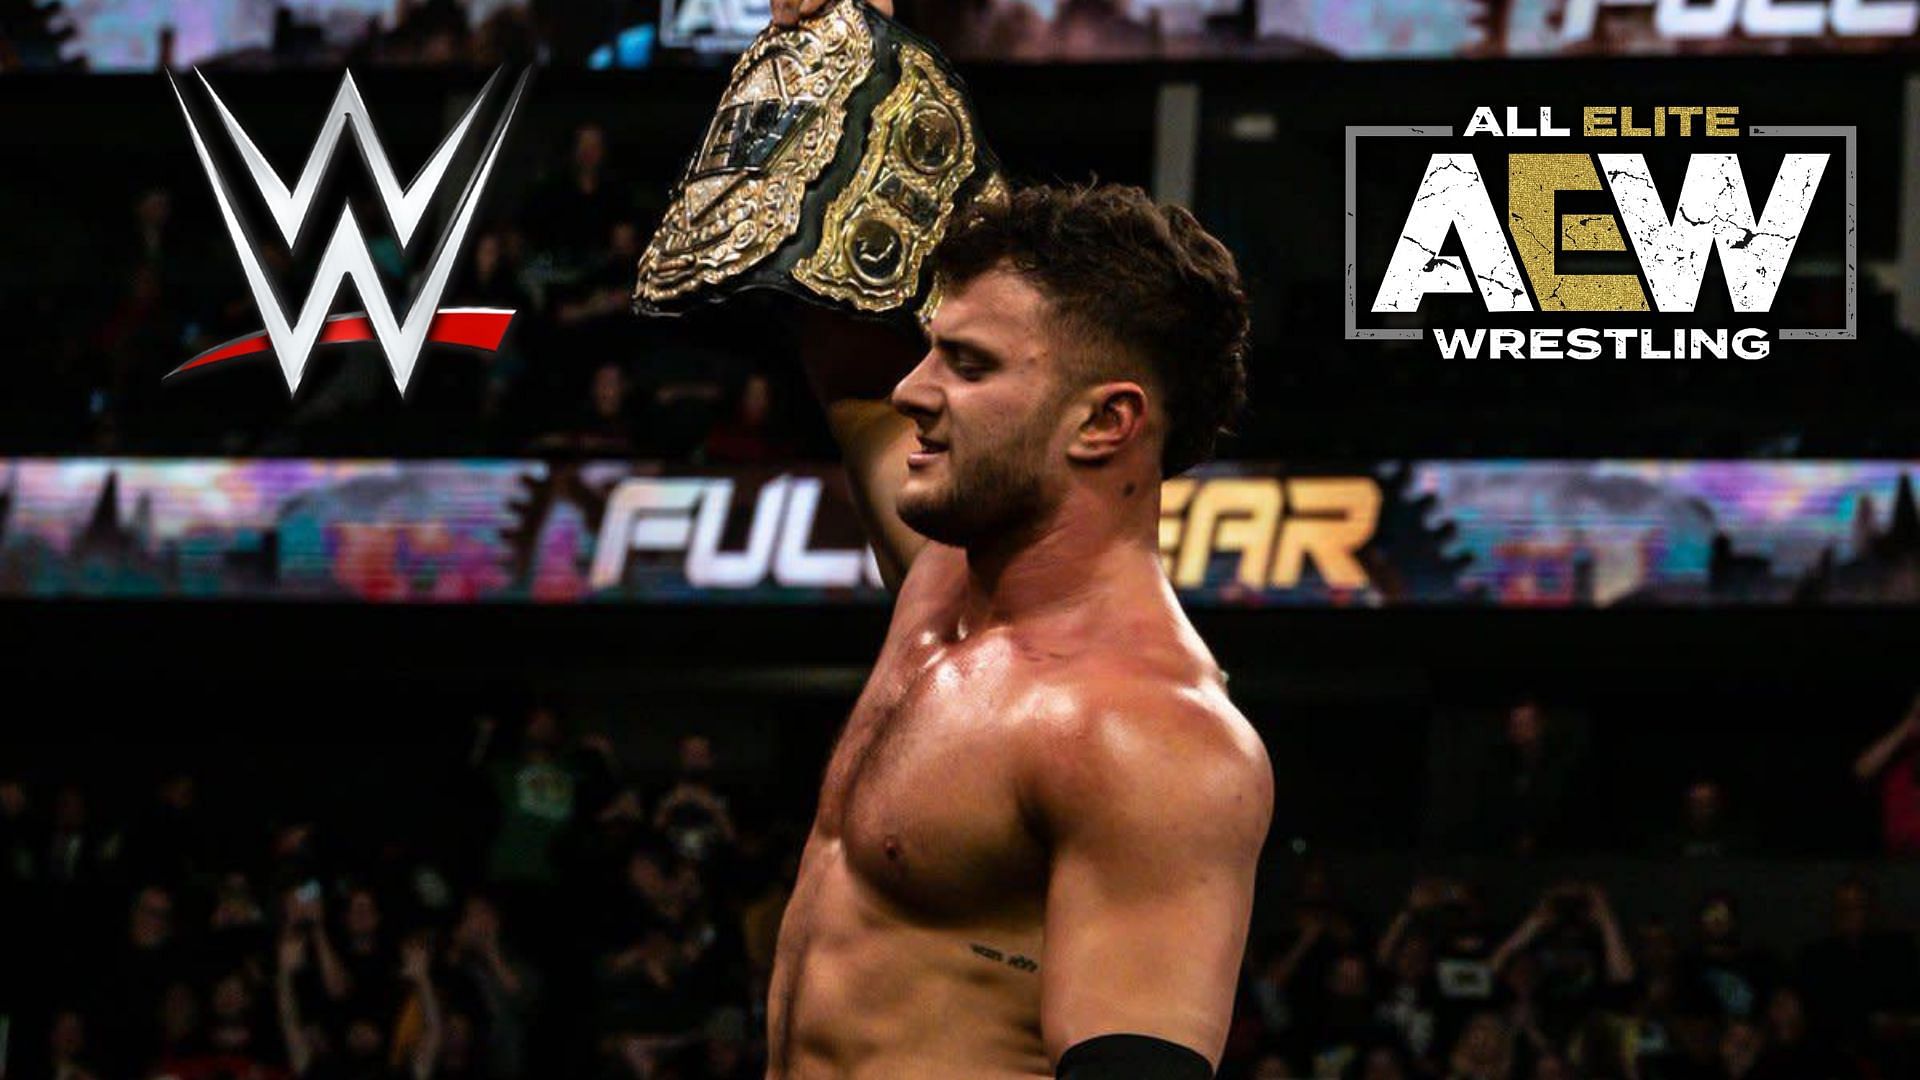 MJF recently defeated Jon Moxley to become the AEW World Champion